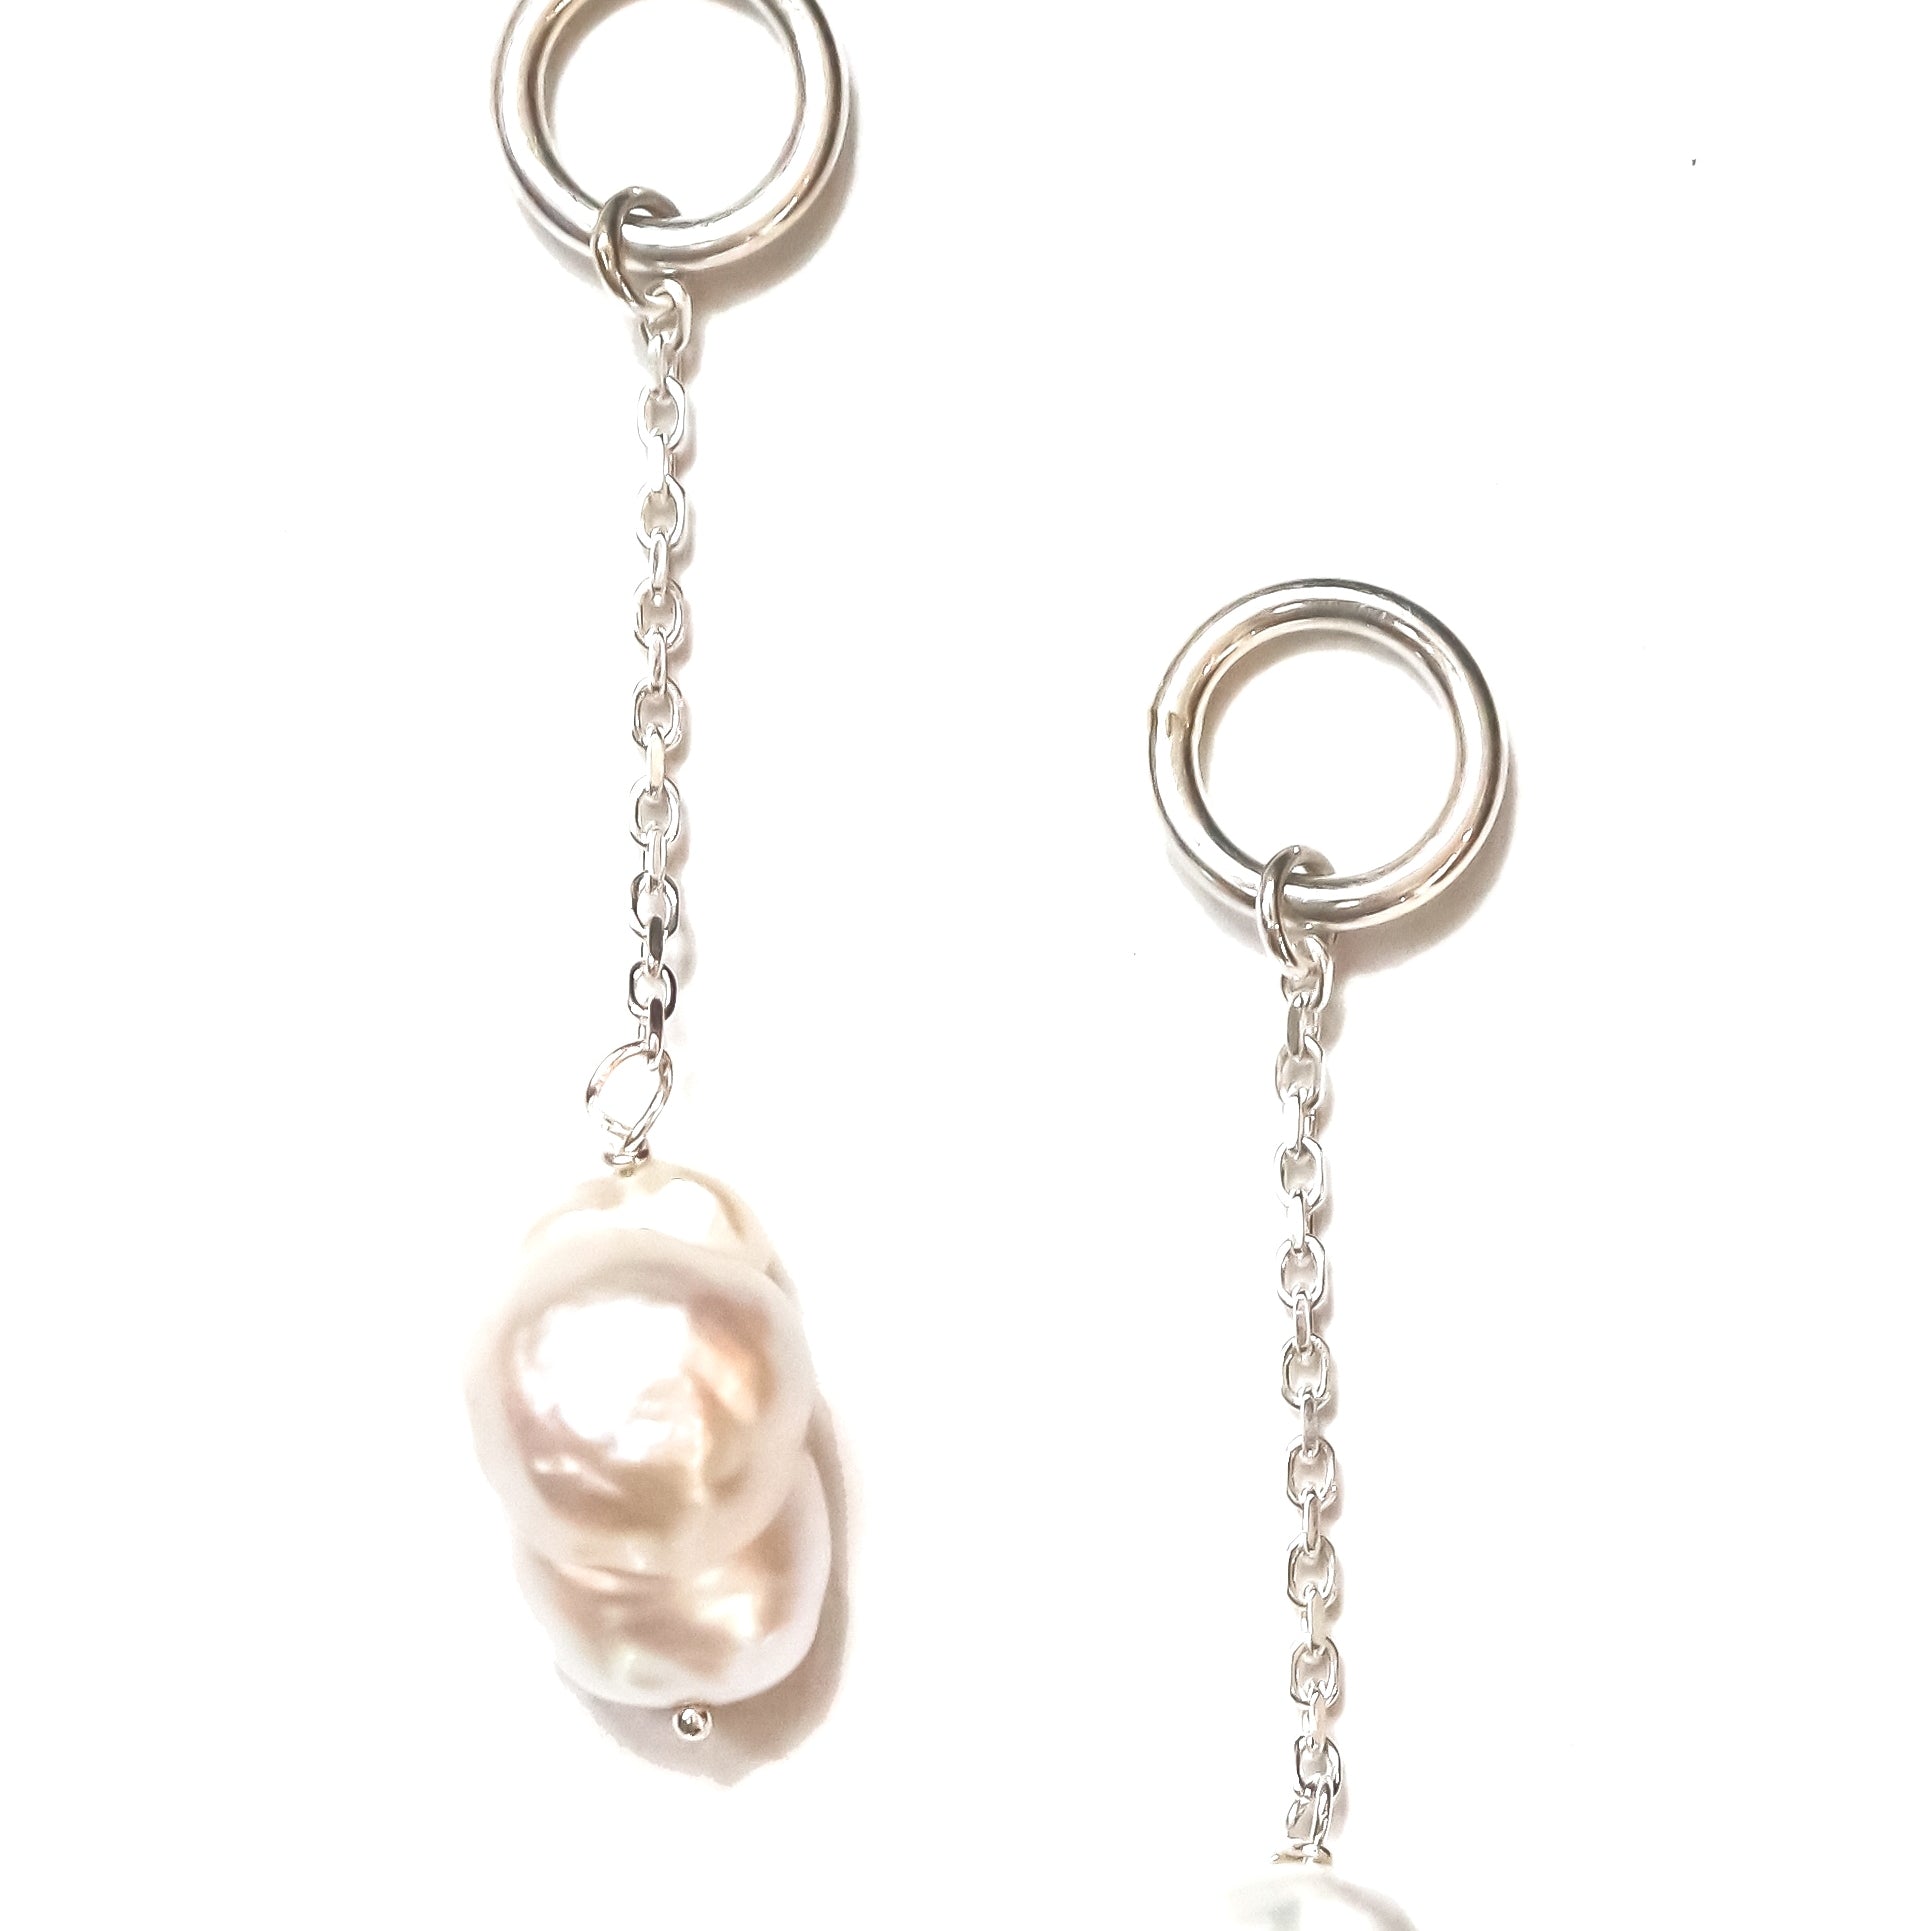 Freshwater Pearl Drops by Paul Eaton Sculptor/Silversmith